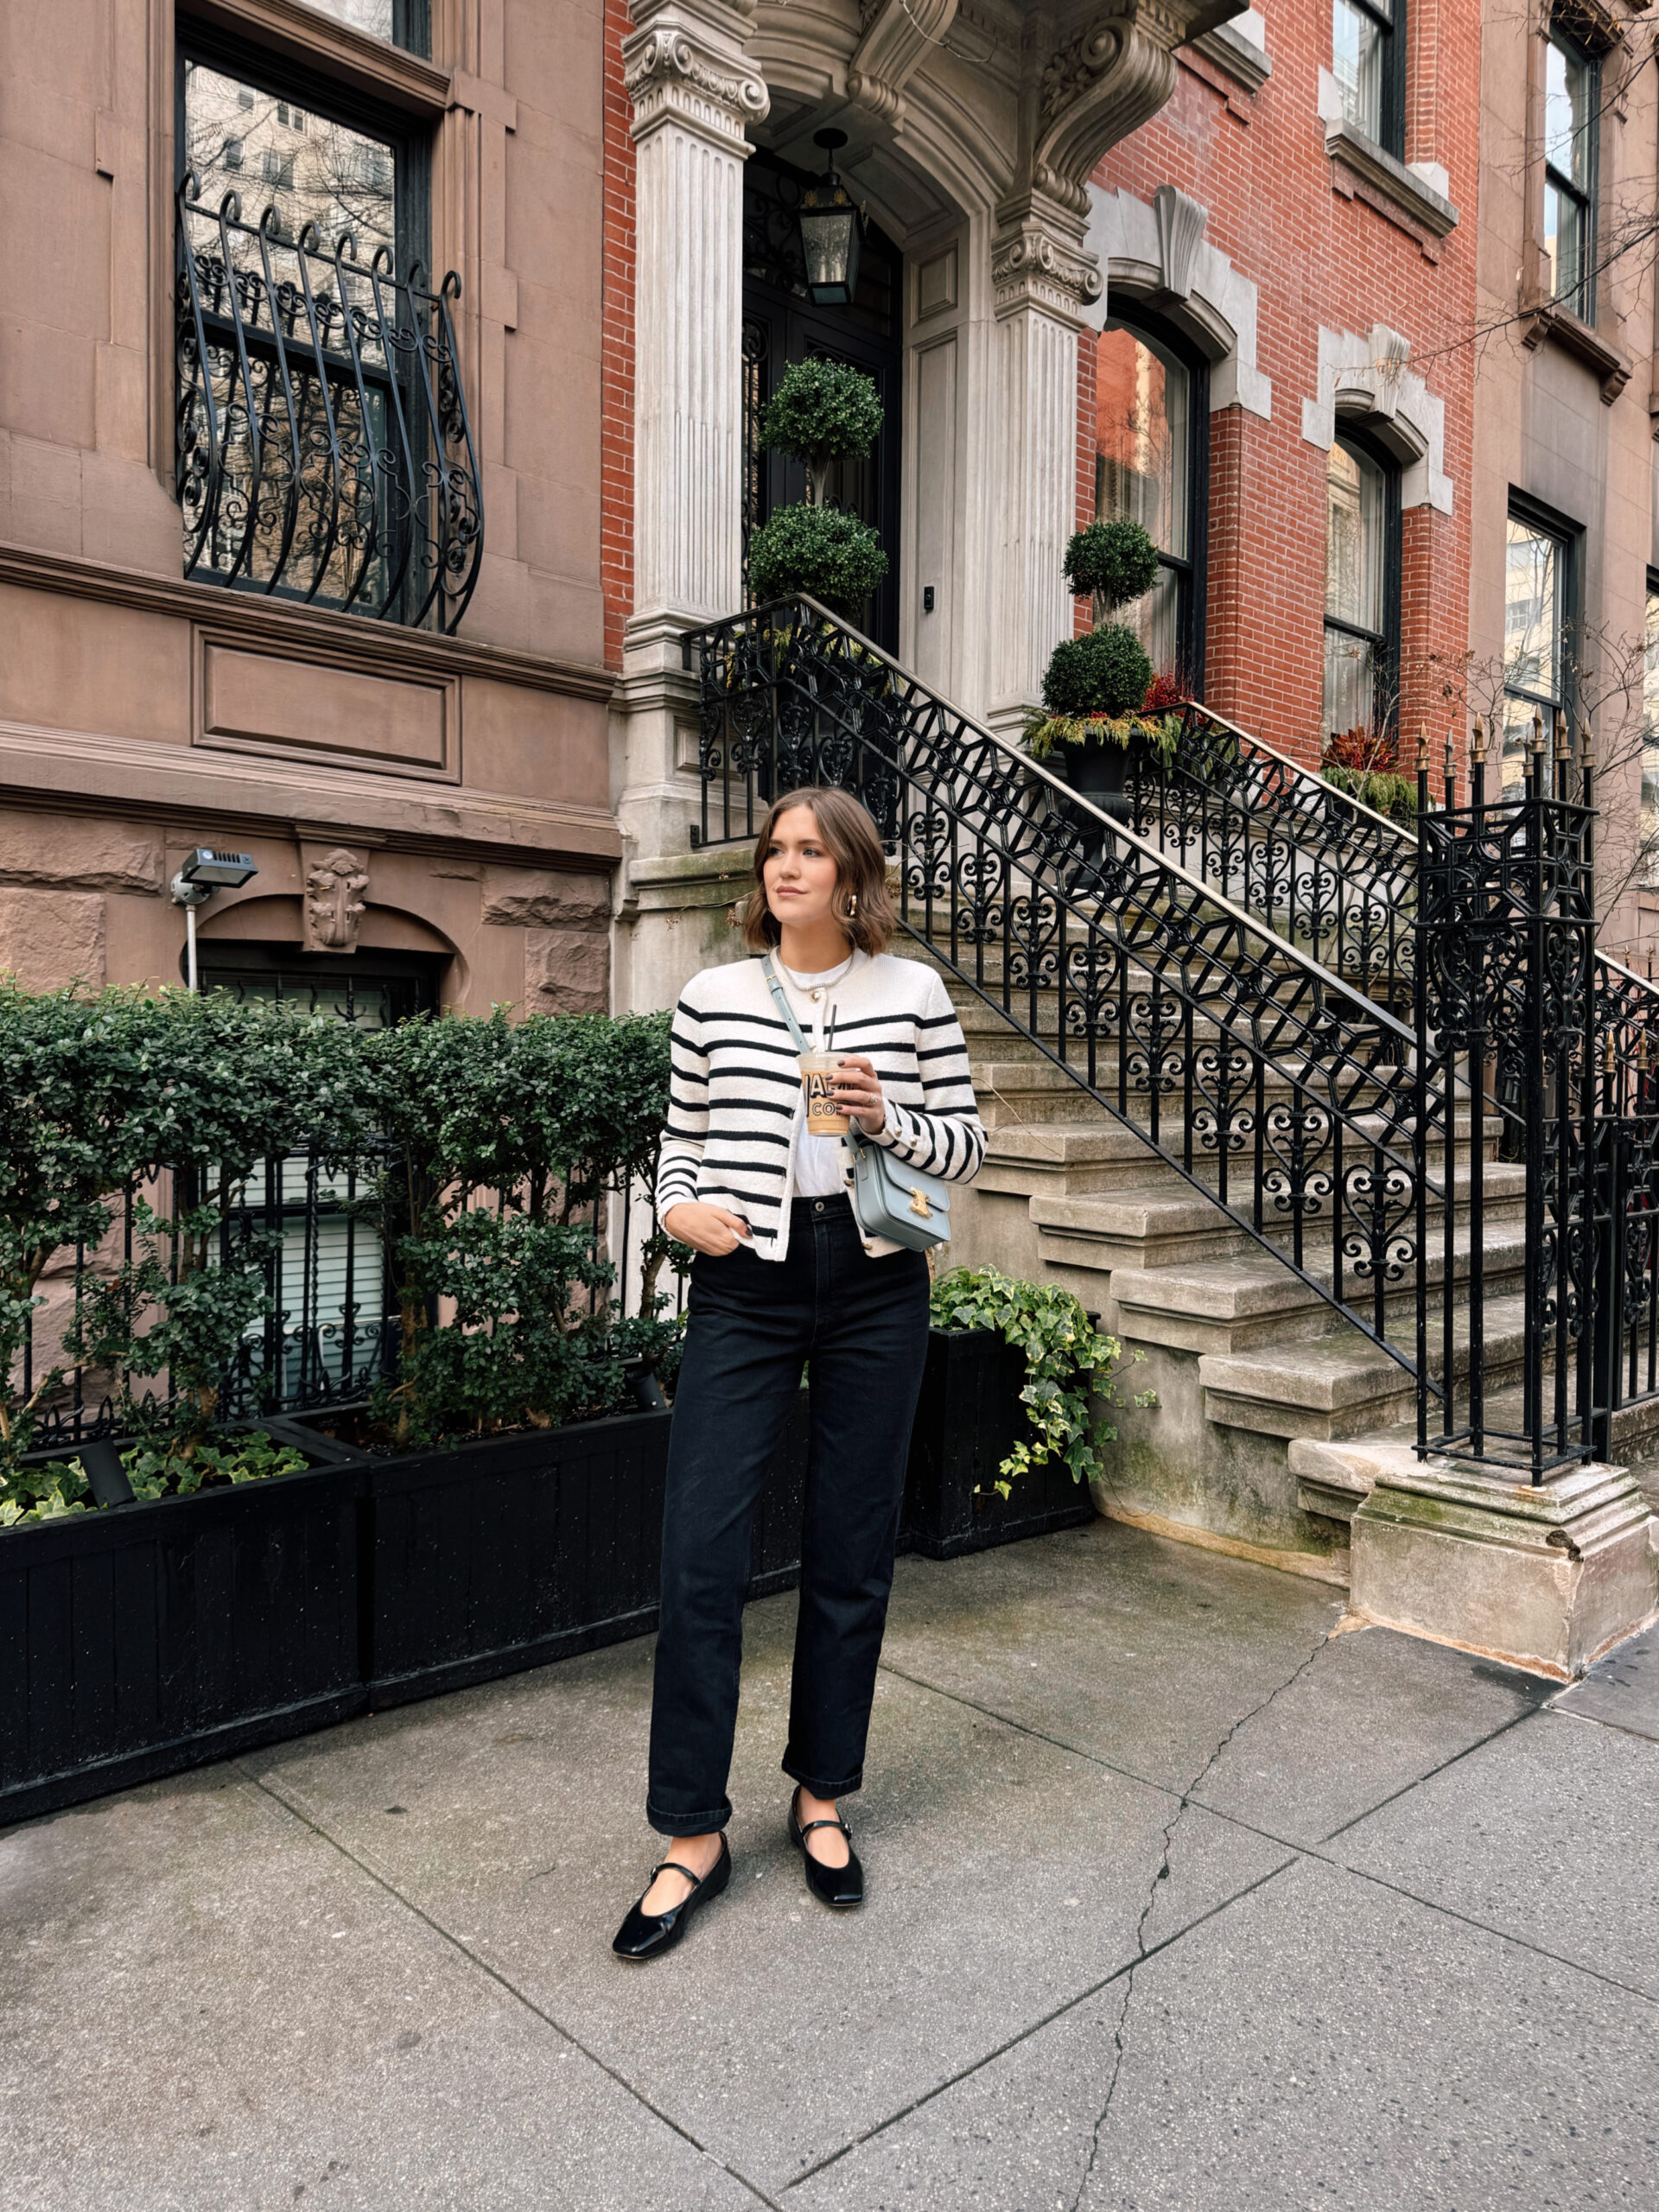 Anna wearing a striped black and white top and black pants on the streets of New York City.